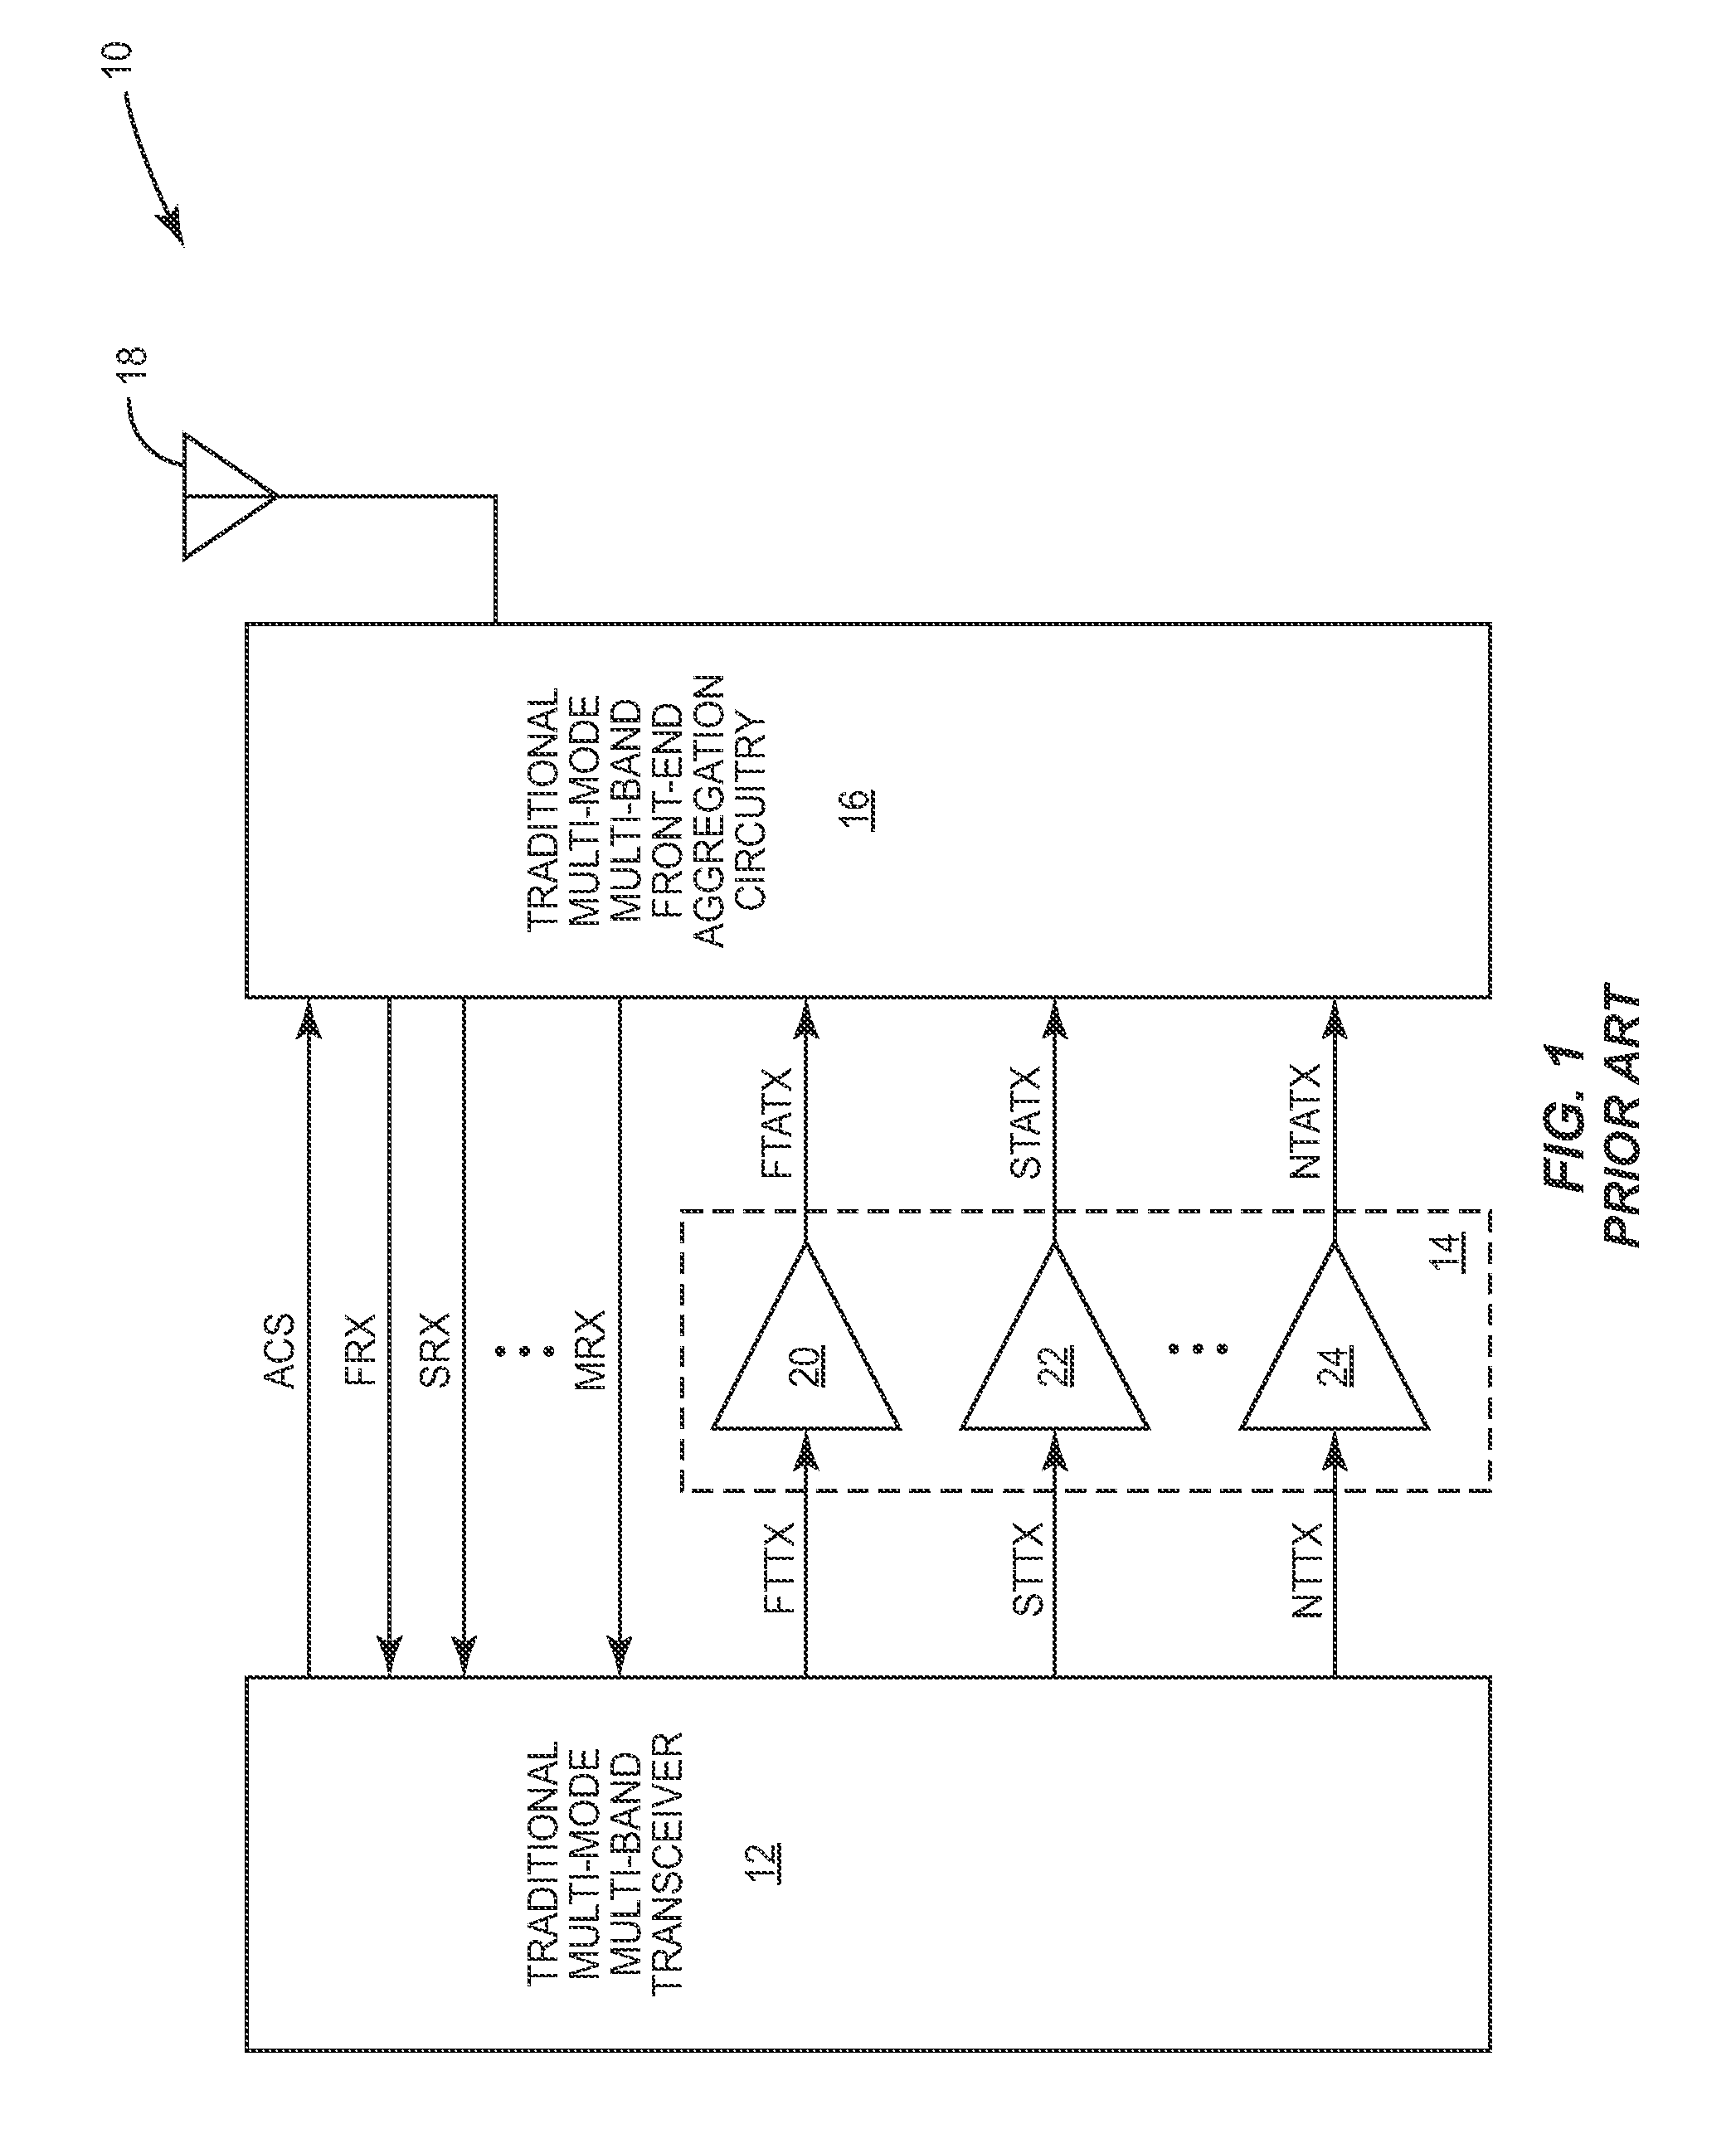 Charge pump based power amplifier envelope power supply and bias power supply